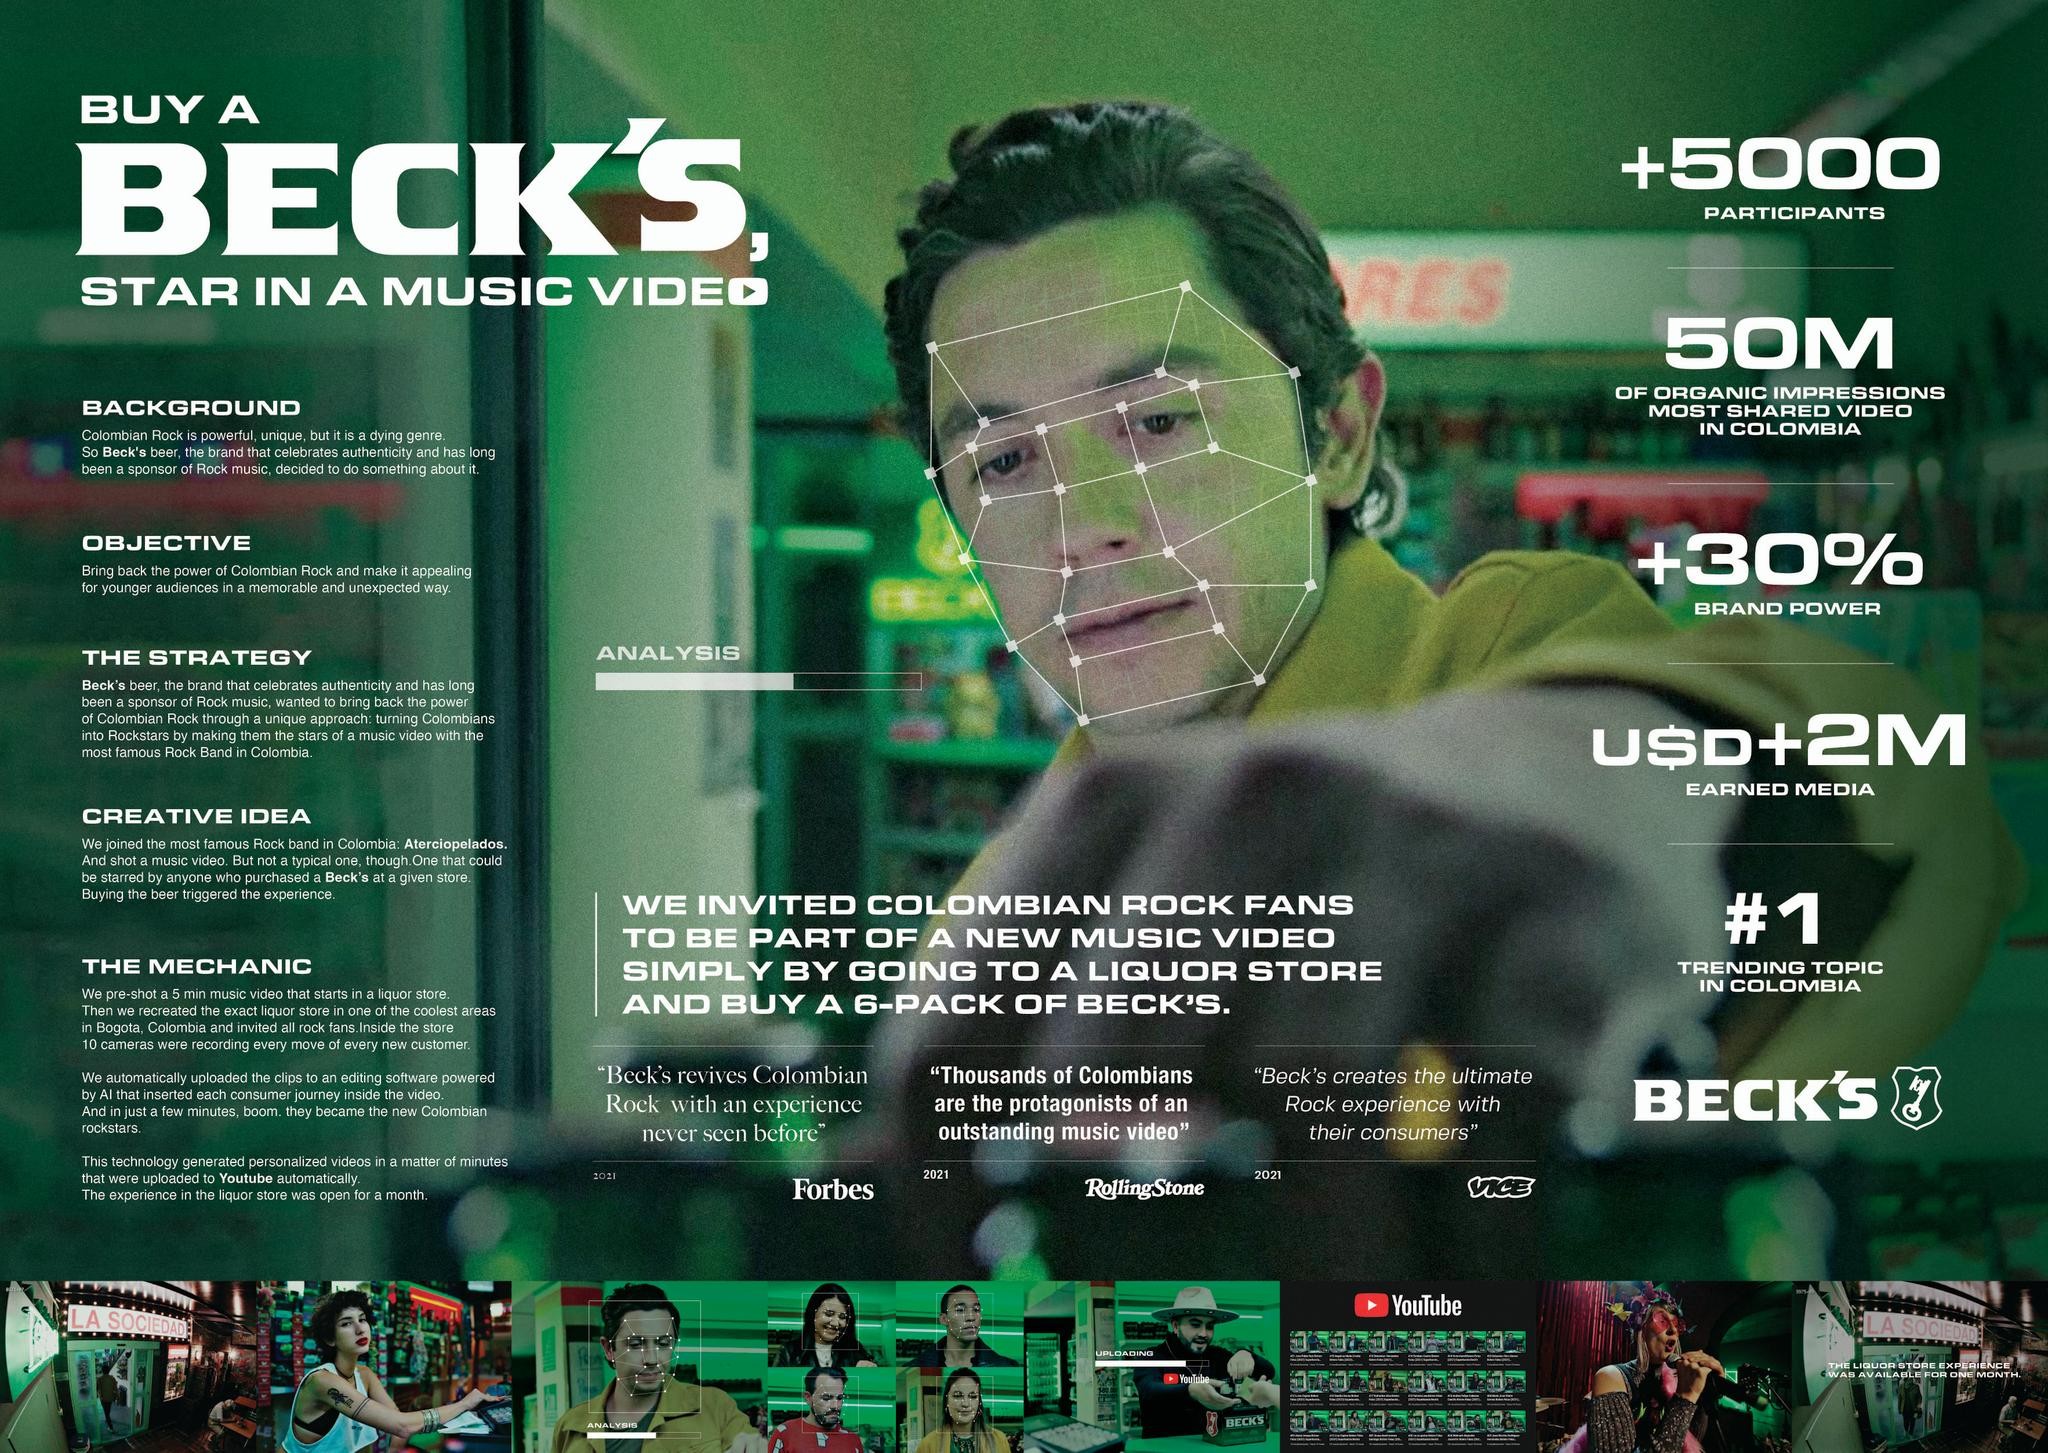 BUY A BECK'S, STAR IN A MUSIC VIDEO